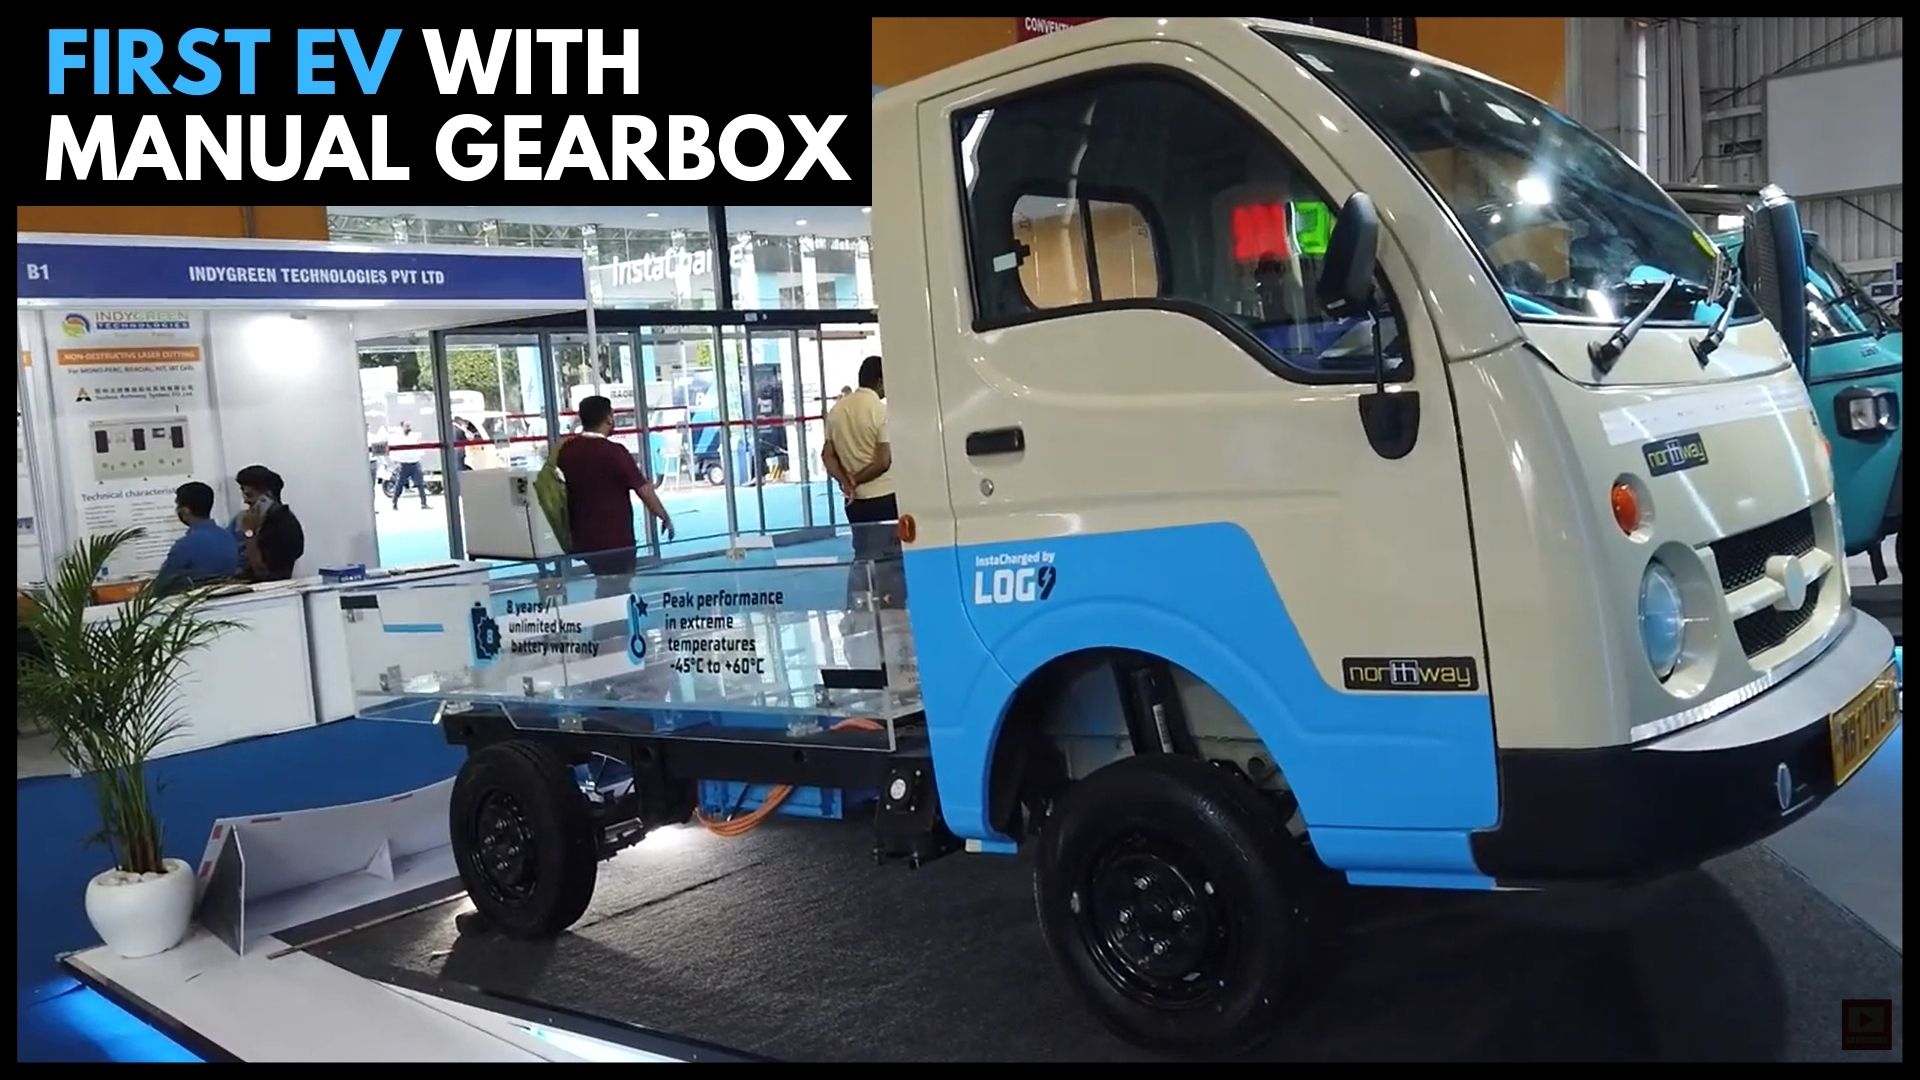 https://e-vehicleinfo.com/first-electric-commercial-vehicle-with-manual-gearbox-system/